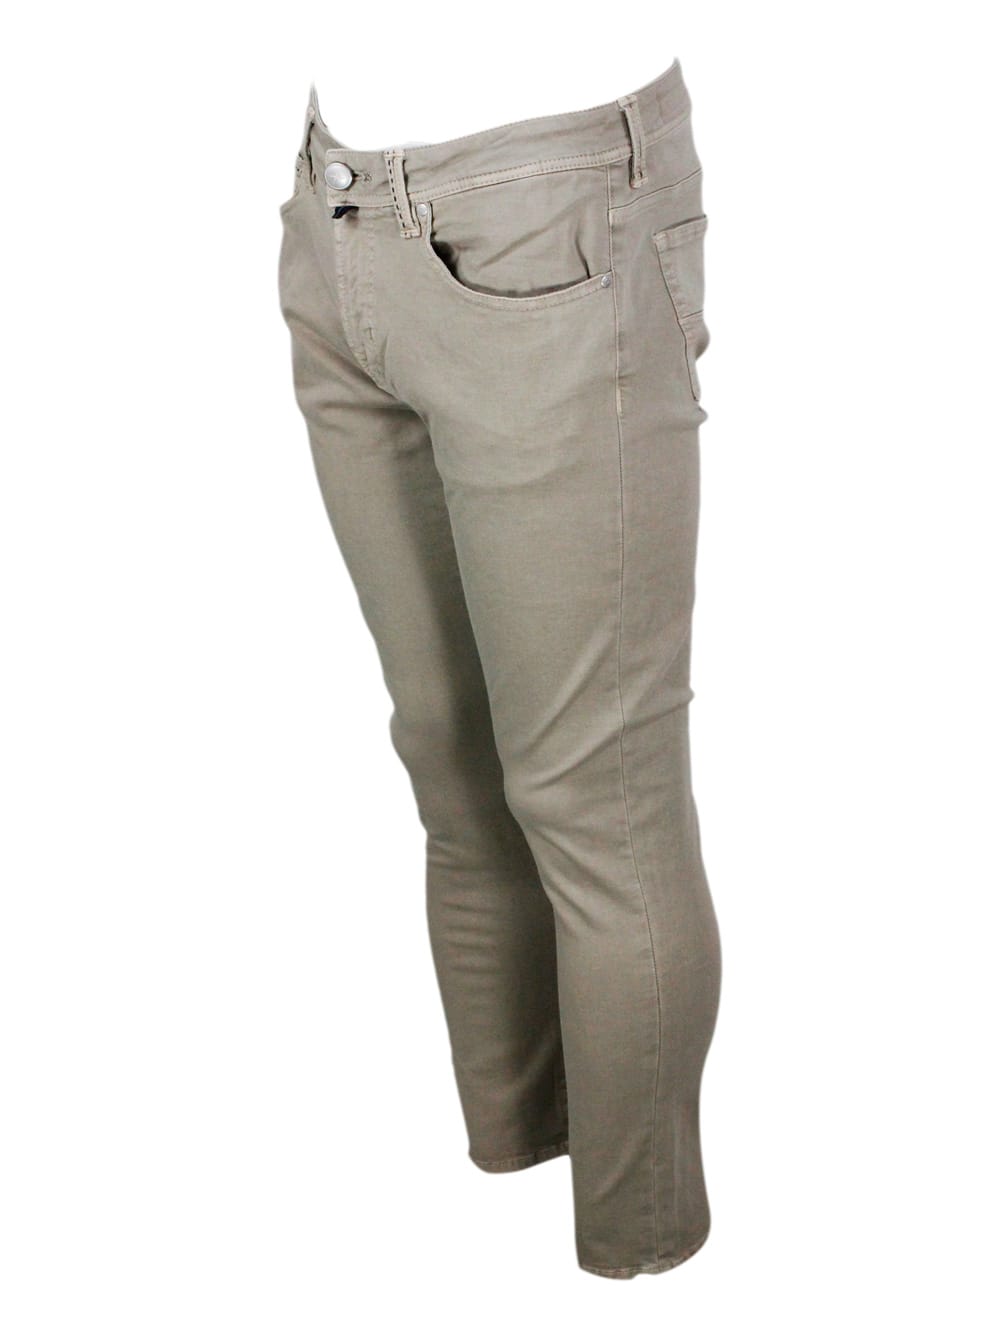 Shop Sartoria Tramarossa Leonardo Slim Zip Trousers In Soft Cotton With 5 Pockets With Tailored Stitching And Suede Tab. Zip  In Sand Beige